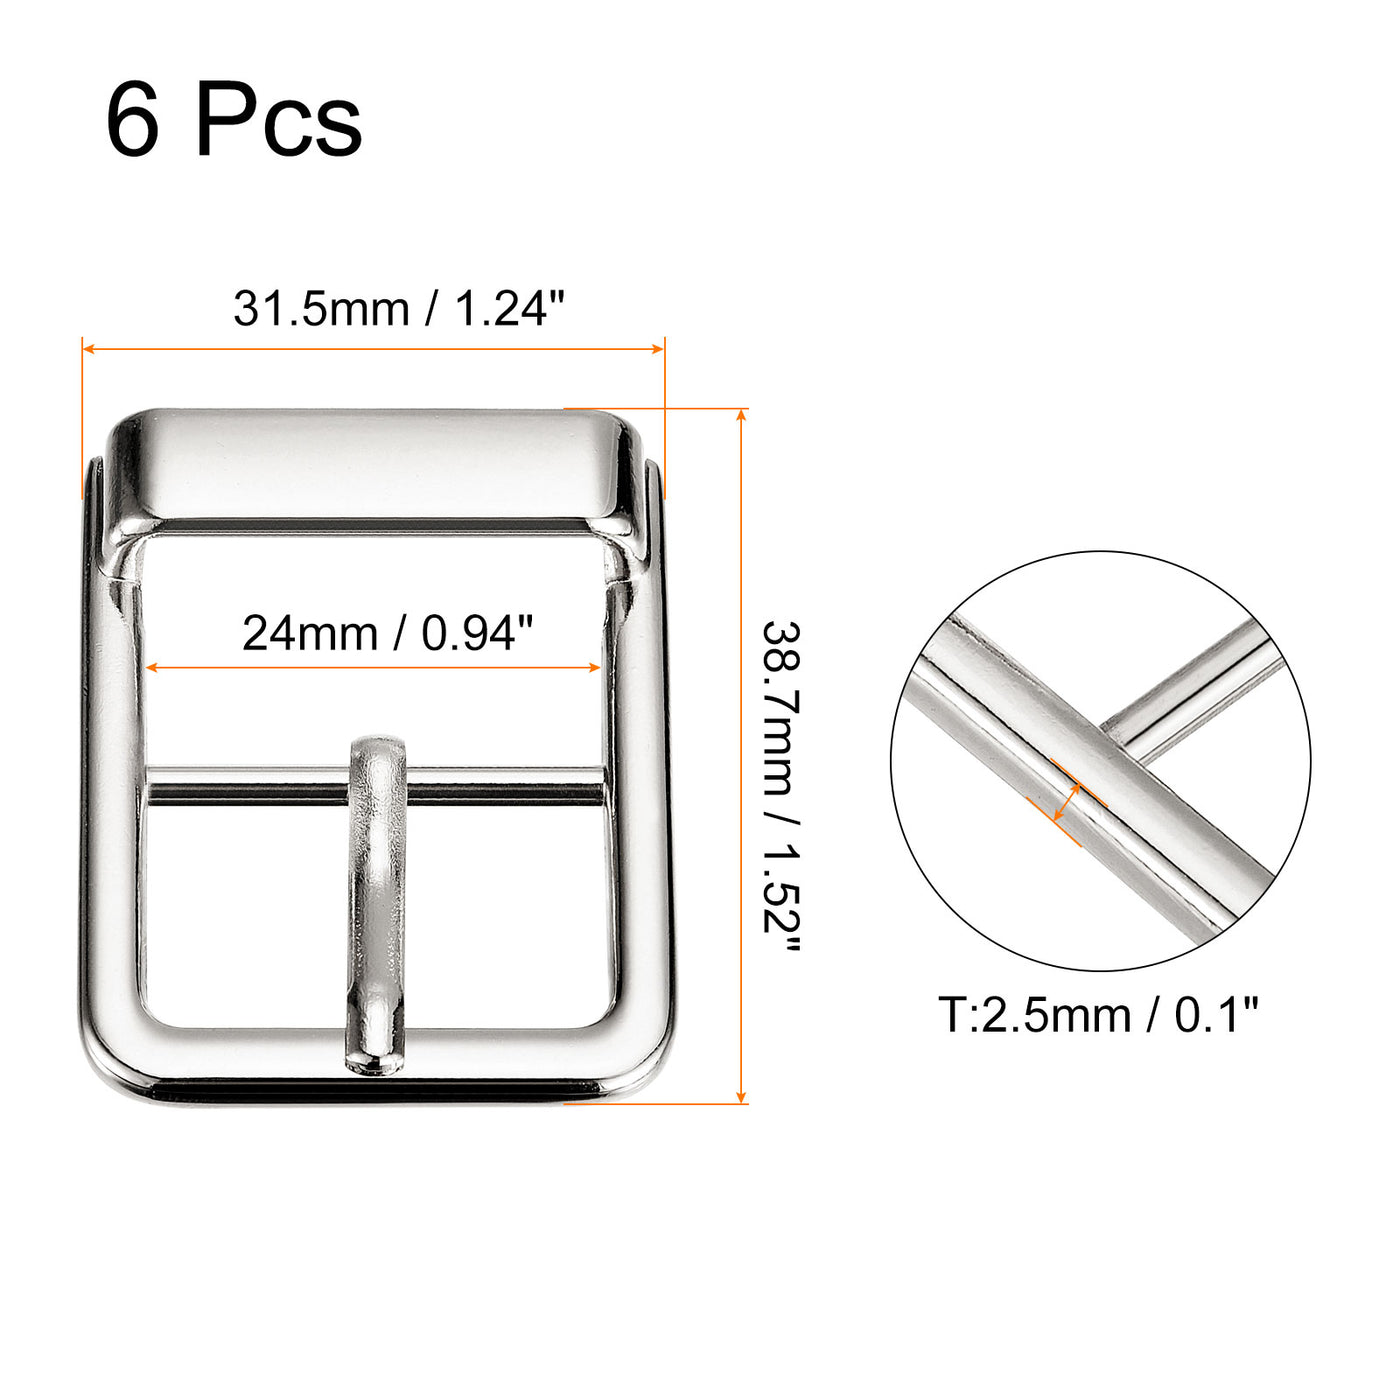 uxcell Uxcell 6Pcs 0.94" Single Prong Belt Buckle Square Center Bar Buckles for Belt, Silver